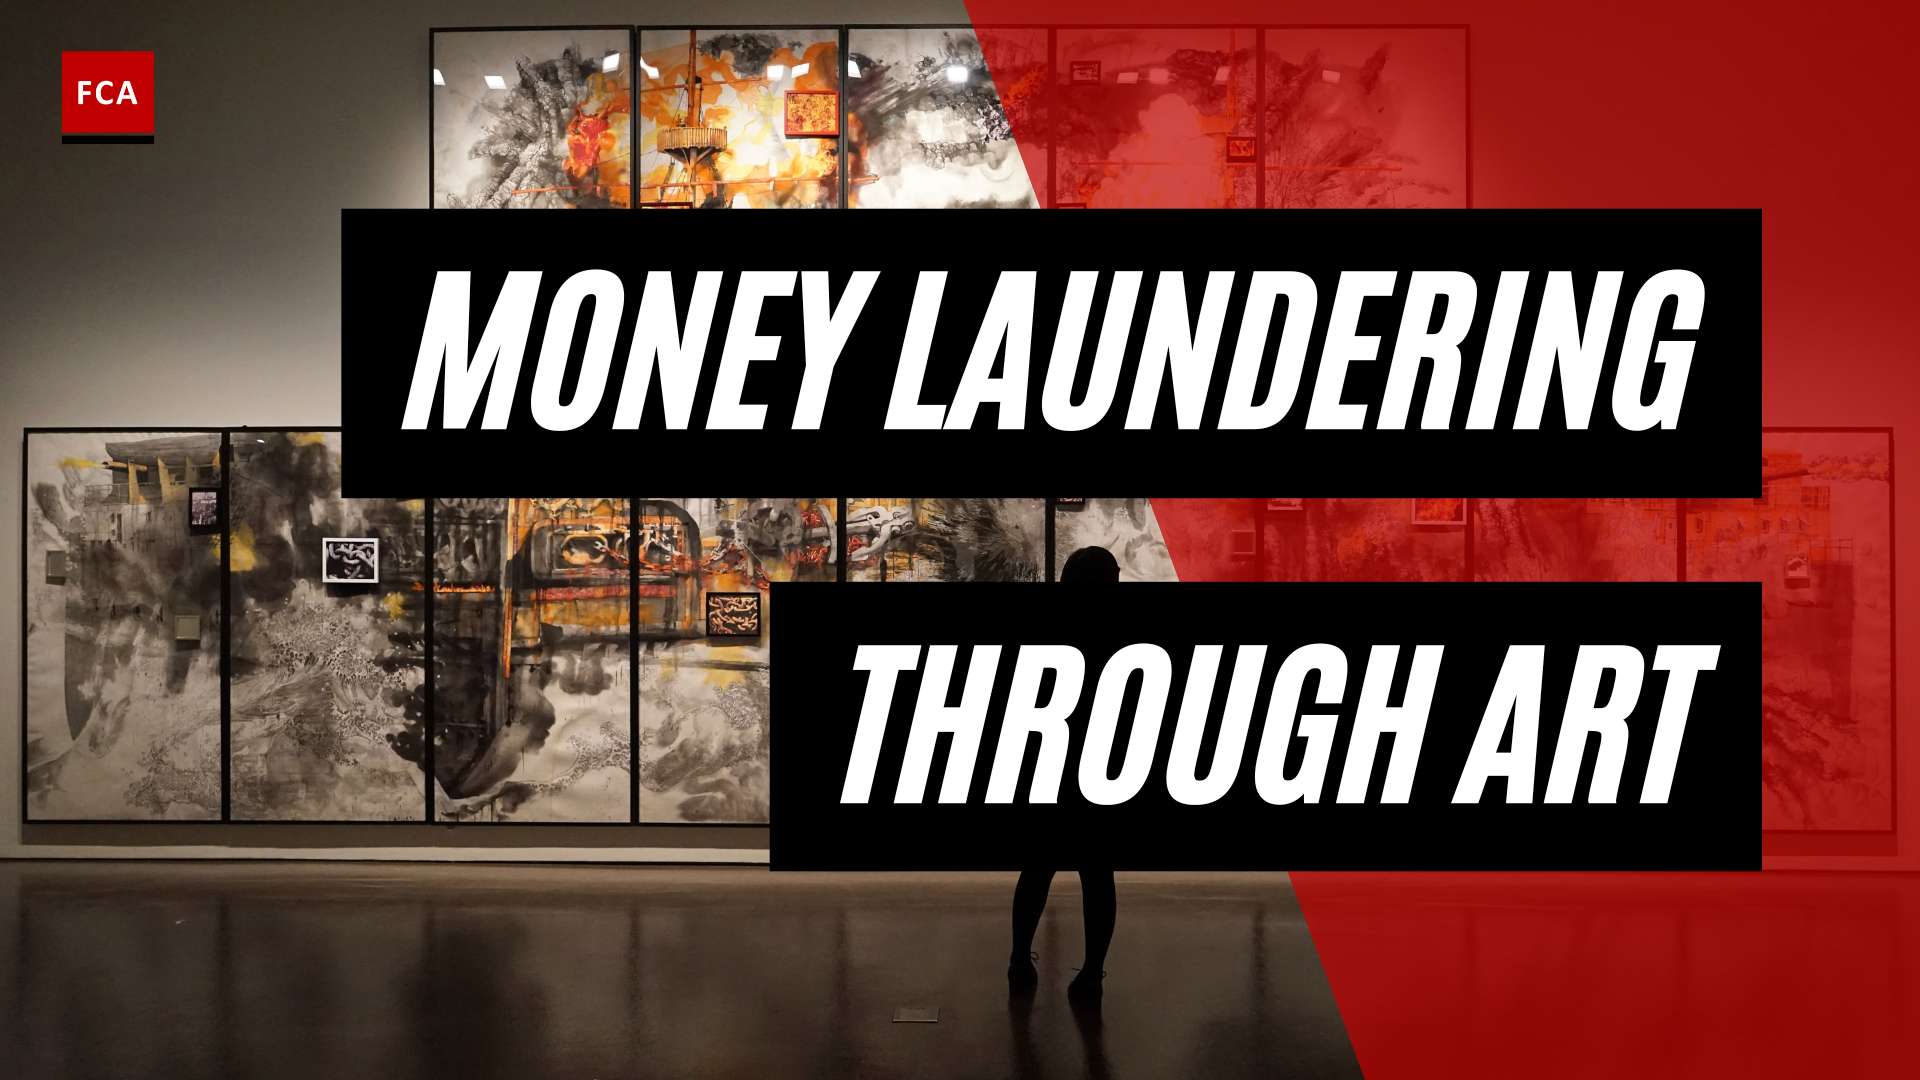 Painting A Sinister Picture: Money Laundering Through Art Exposed